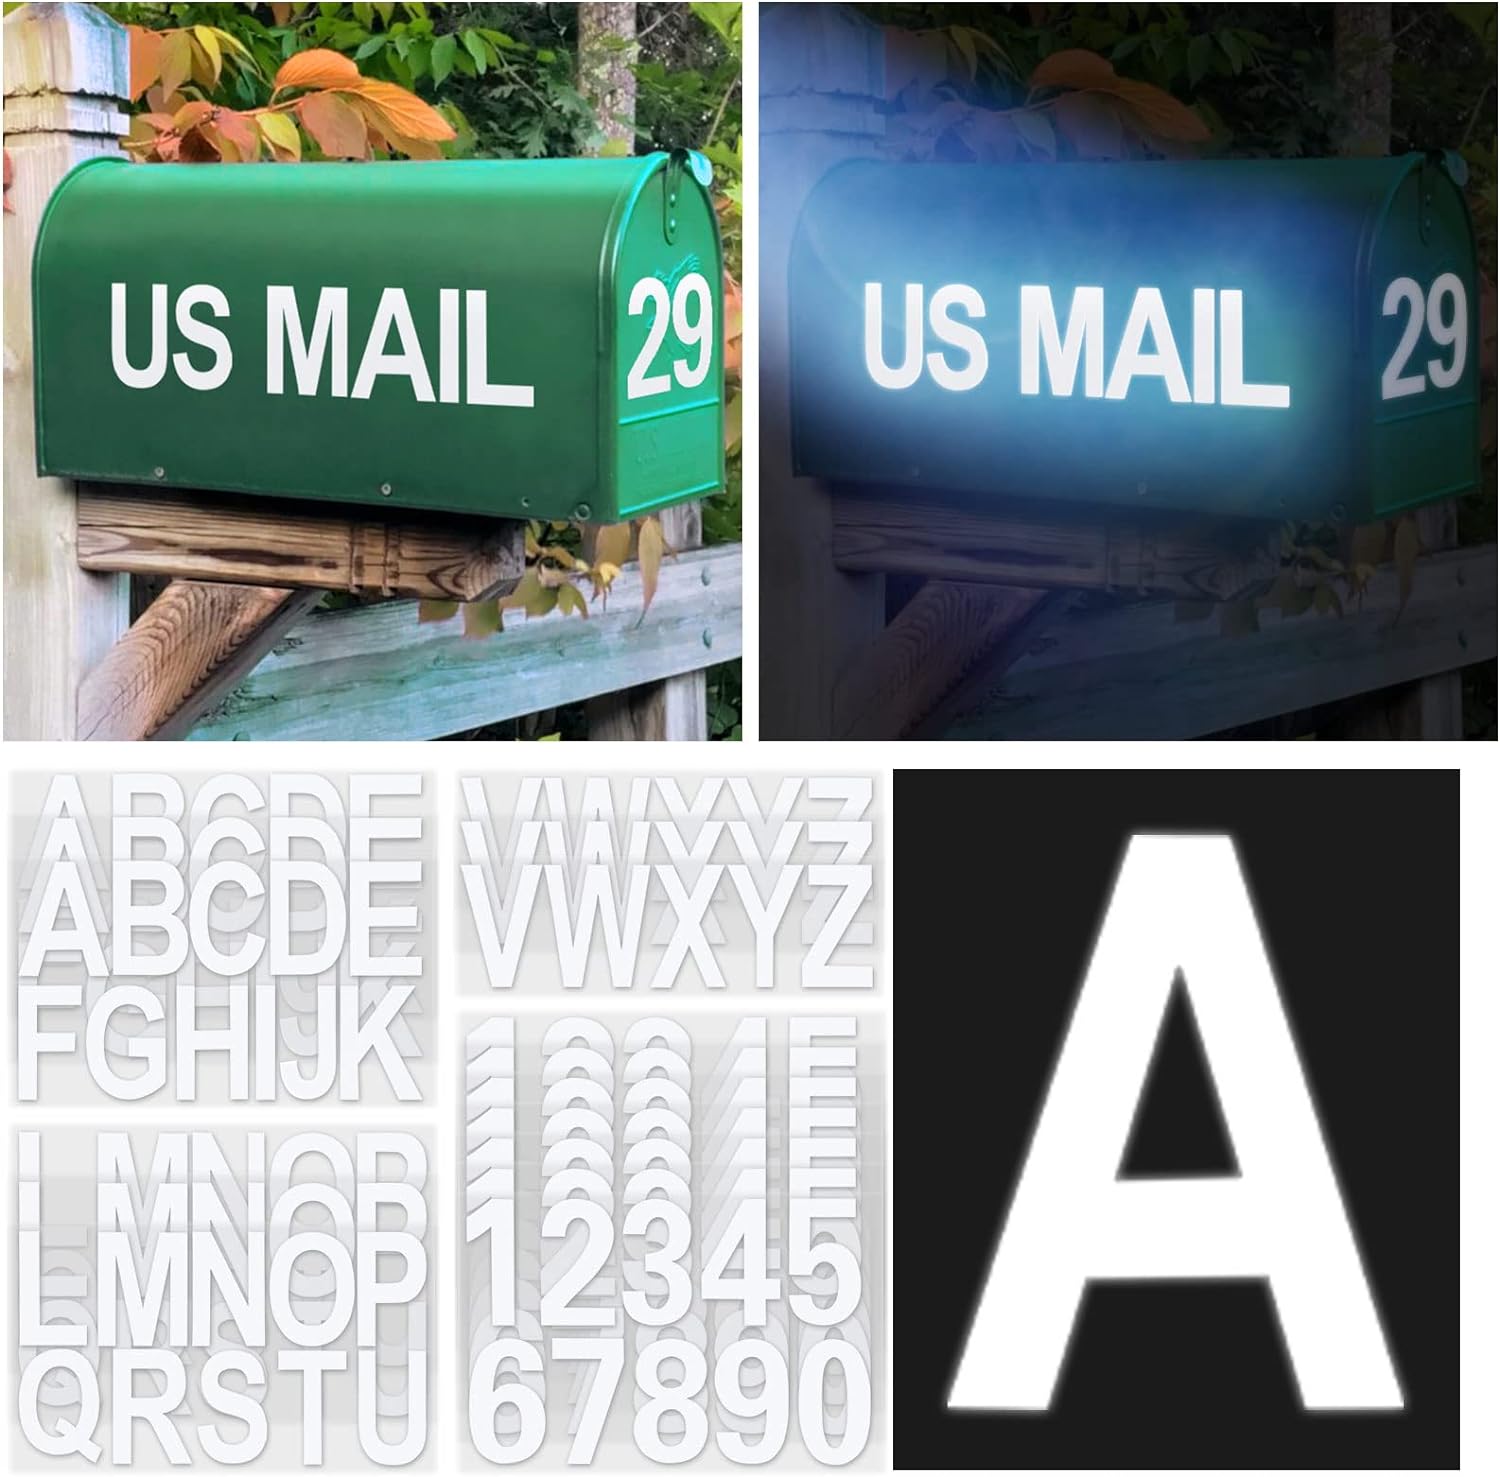 Seloom reflective_mailbox_stickers2 148 PCS 3 Reflective Mailbox Numbers  Stickers for Outside,White Letter and Number Stickers Address Numbers for  Mailbox,Se